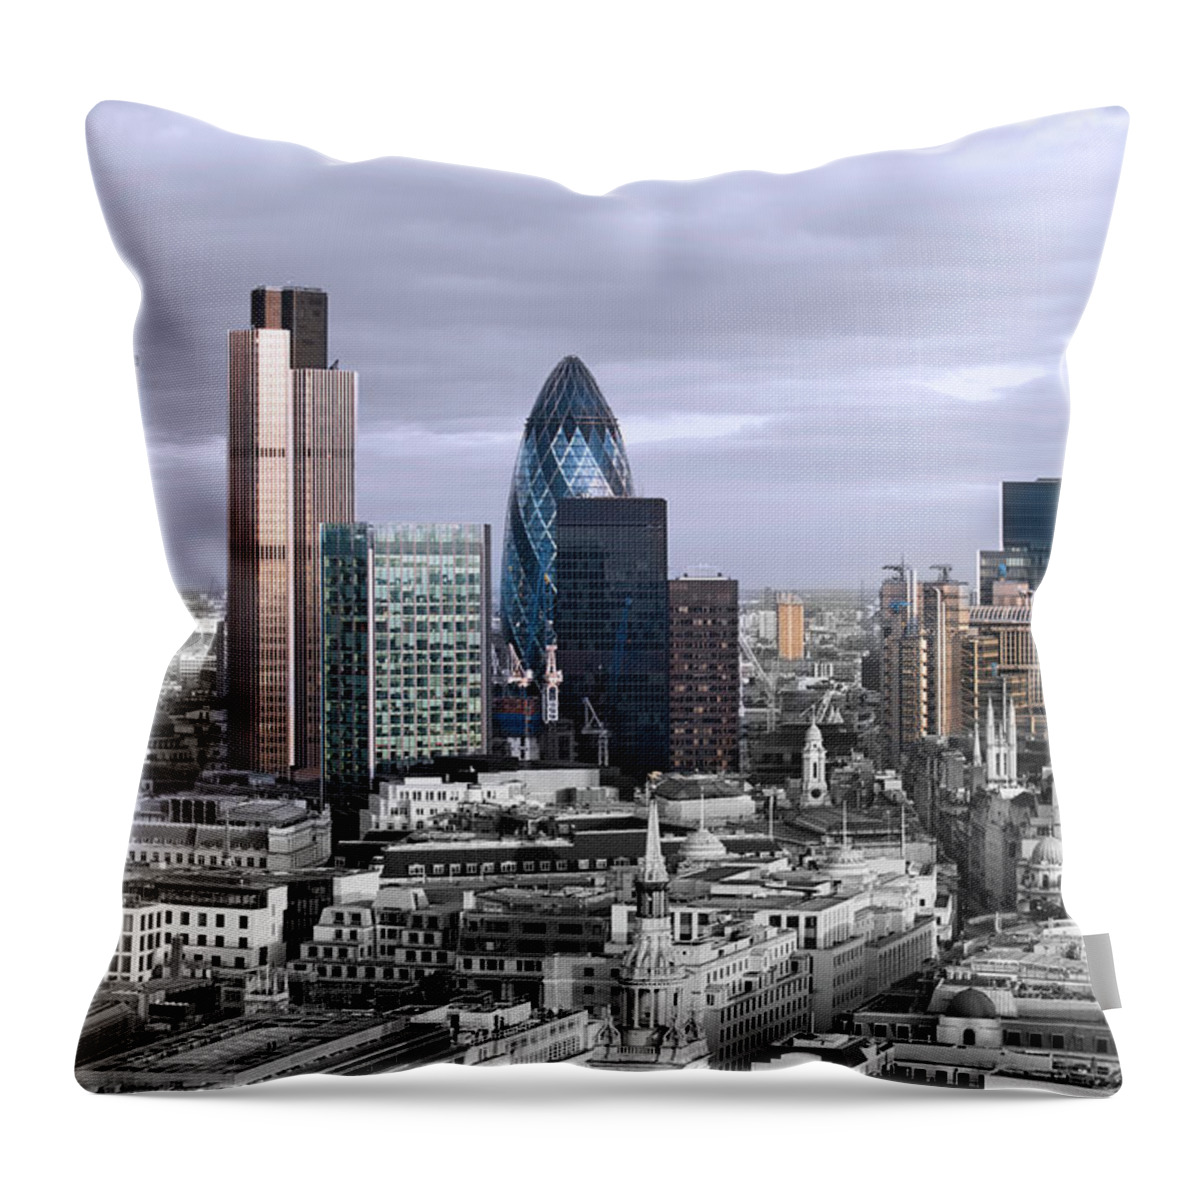 Corporate Business Throw Pillow featuring the photograph London Skyline #2 by Majaiva